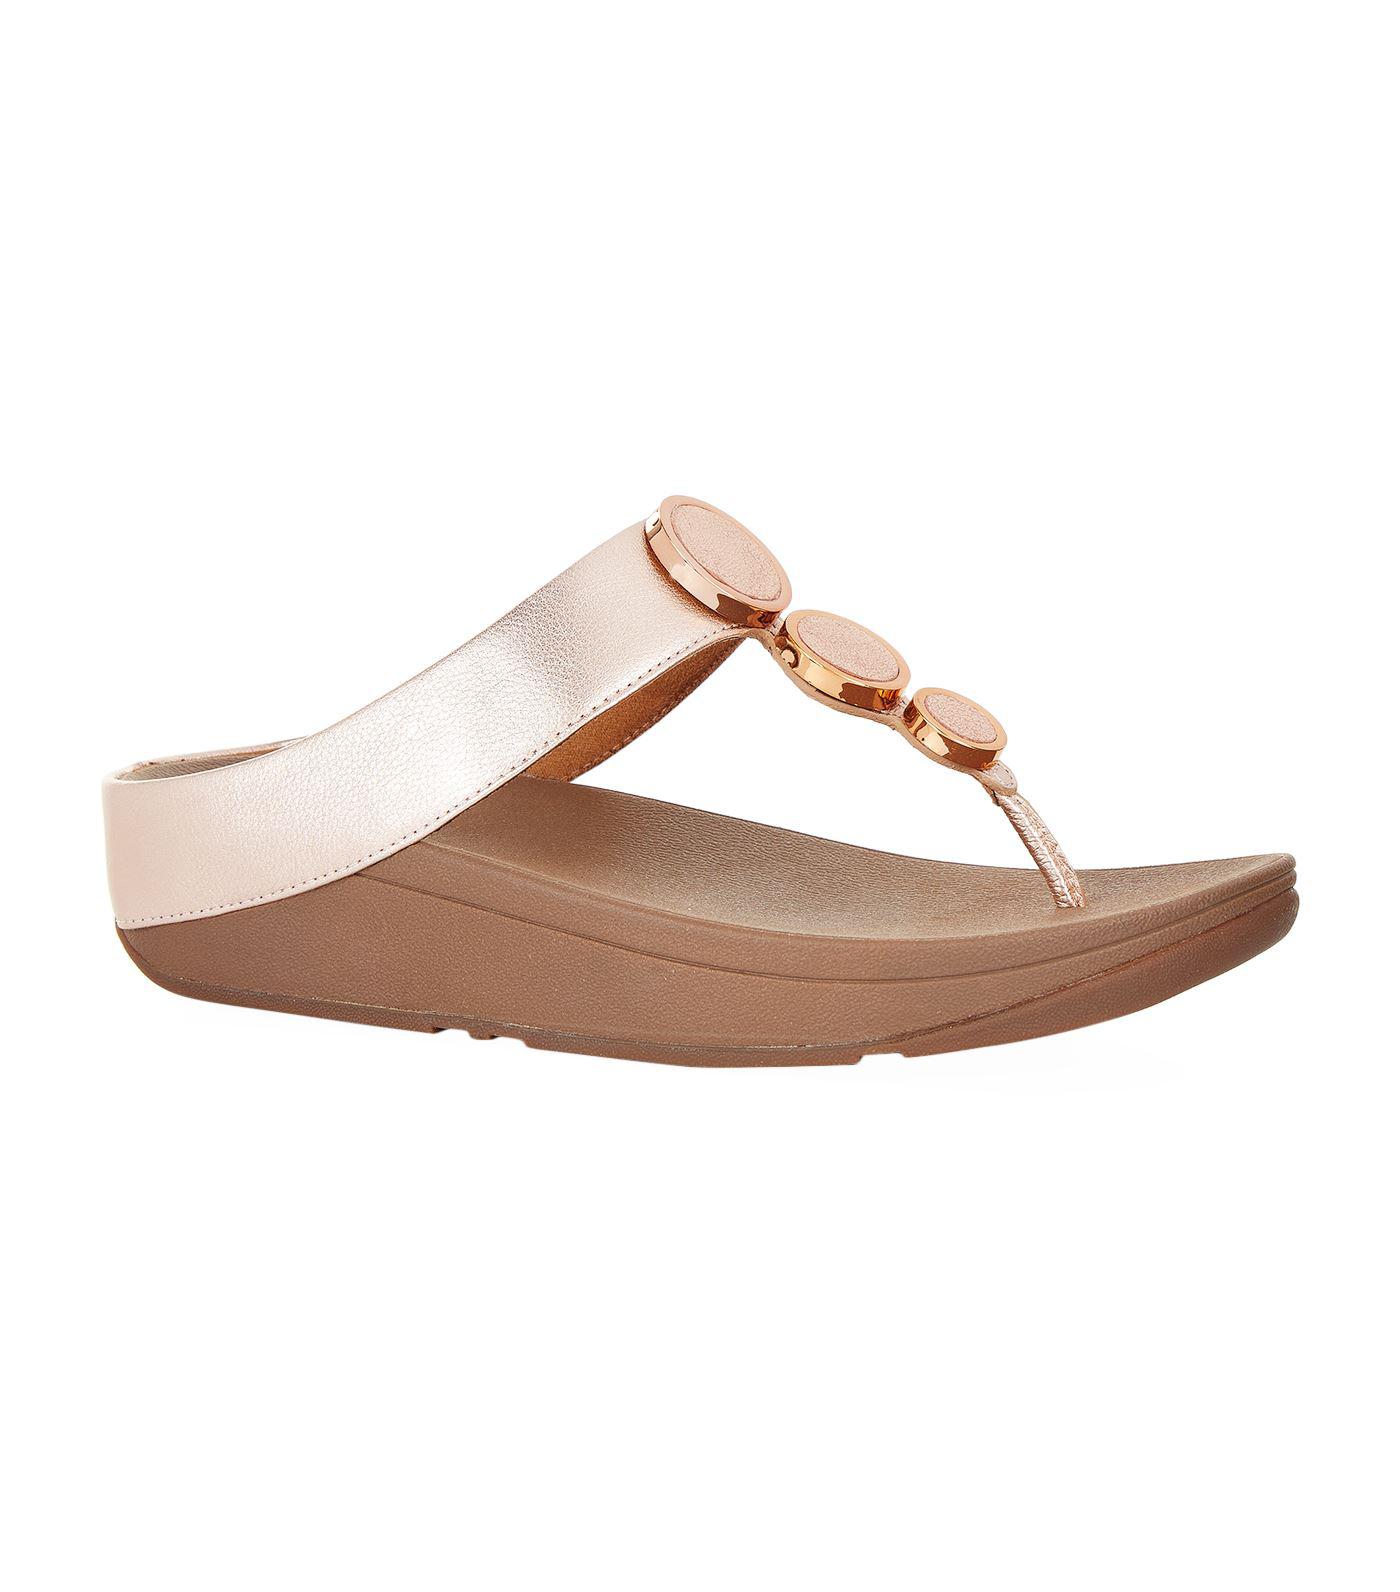 fitflop halo sandal